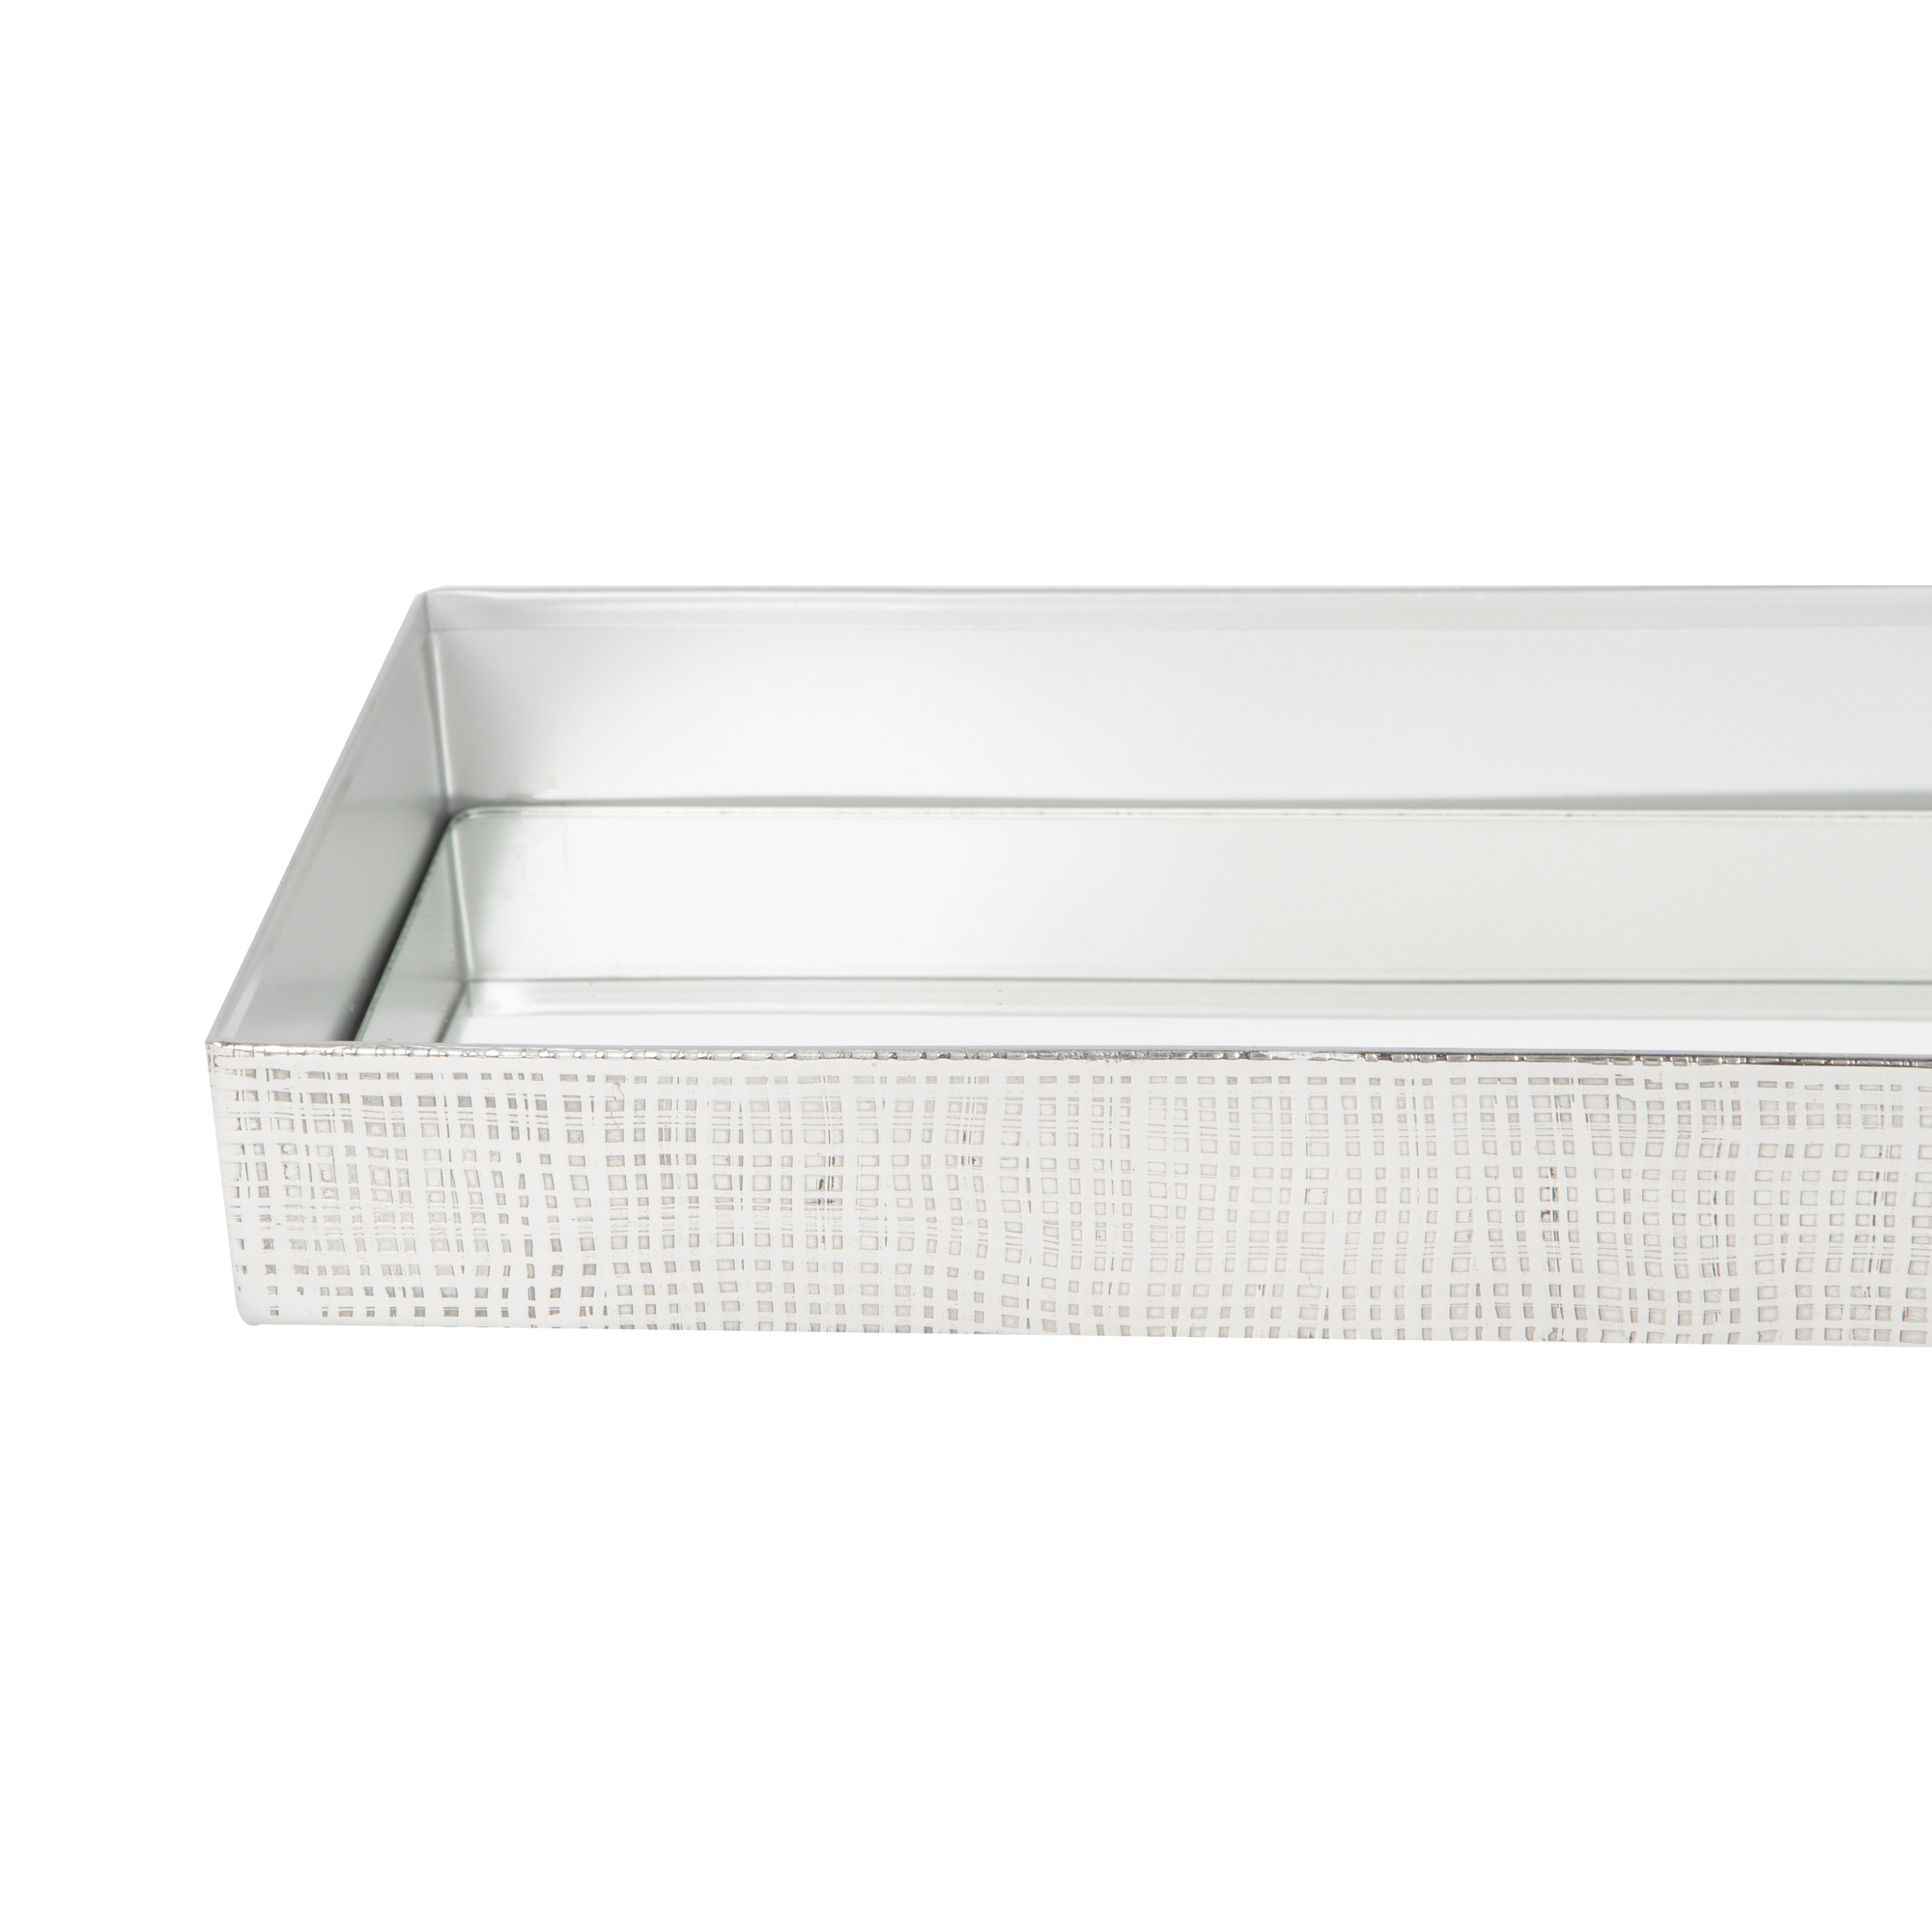 The Crosshatch Tray is made of stainless steel and is finished in a rich, distinct crosshatch texture.